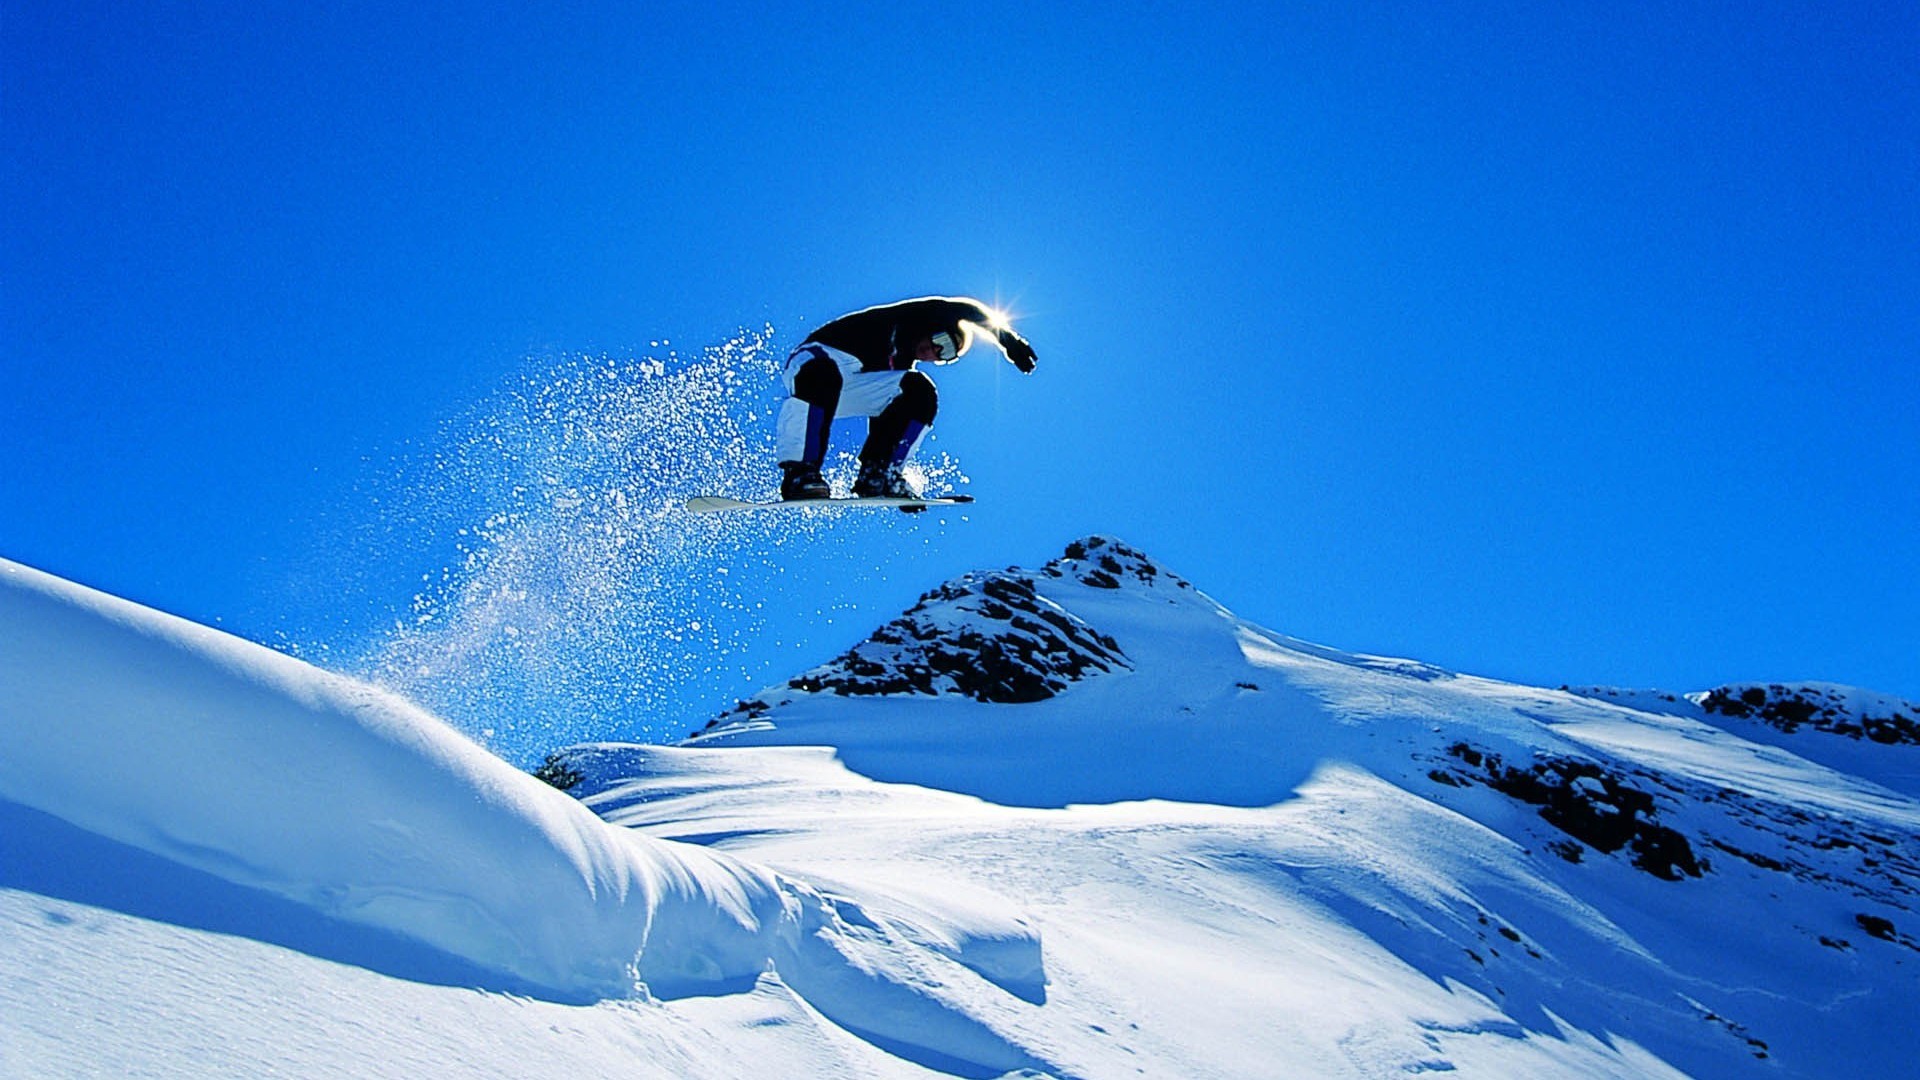 1920x1080 Snowboarding wallpapers